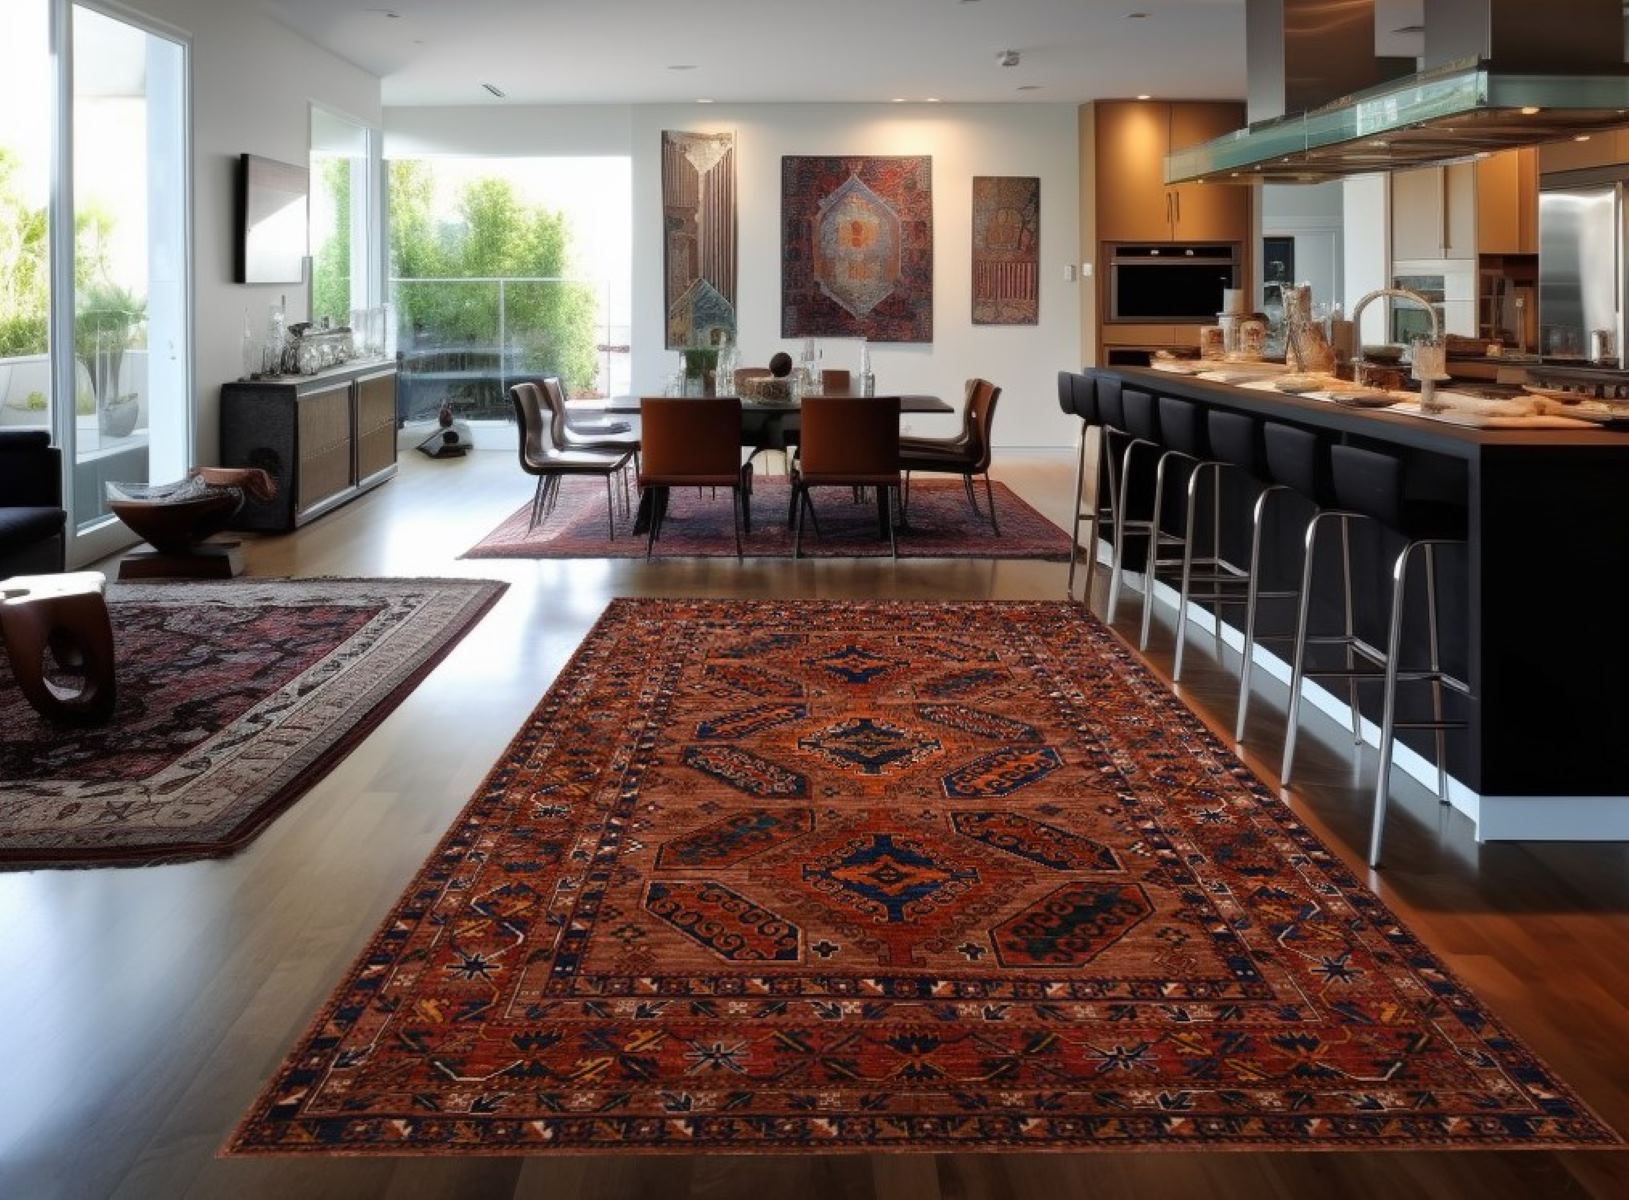 How To Mix Oriental Rugs